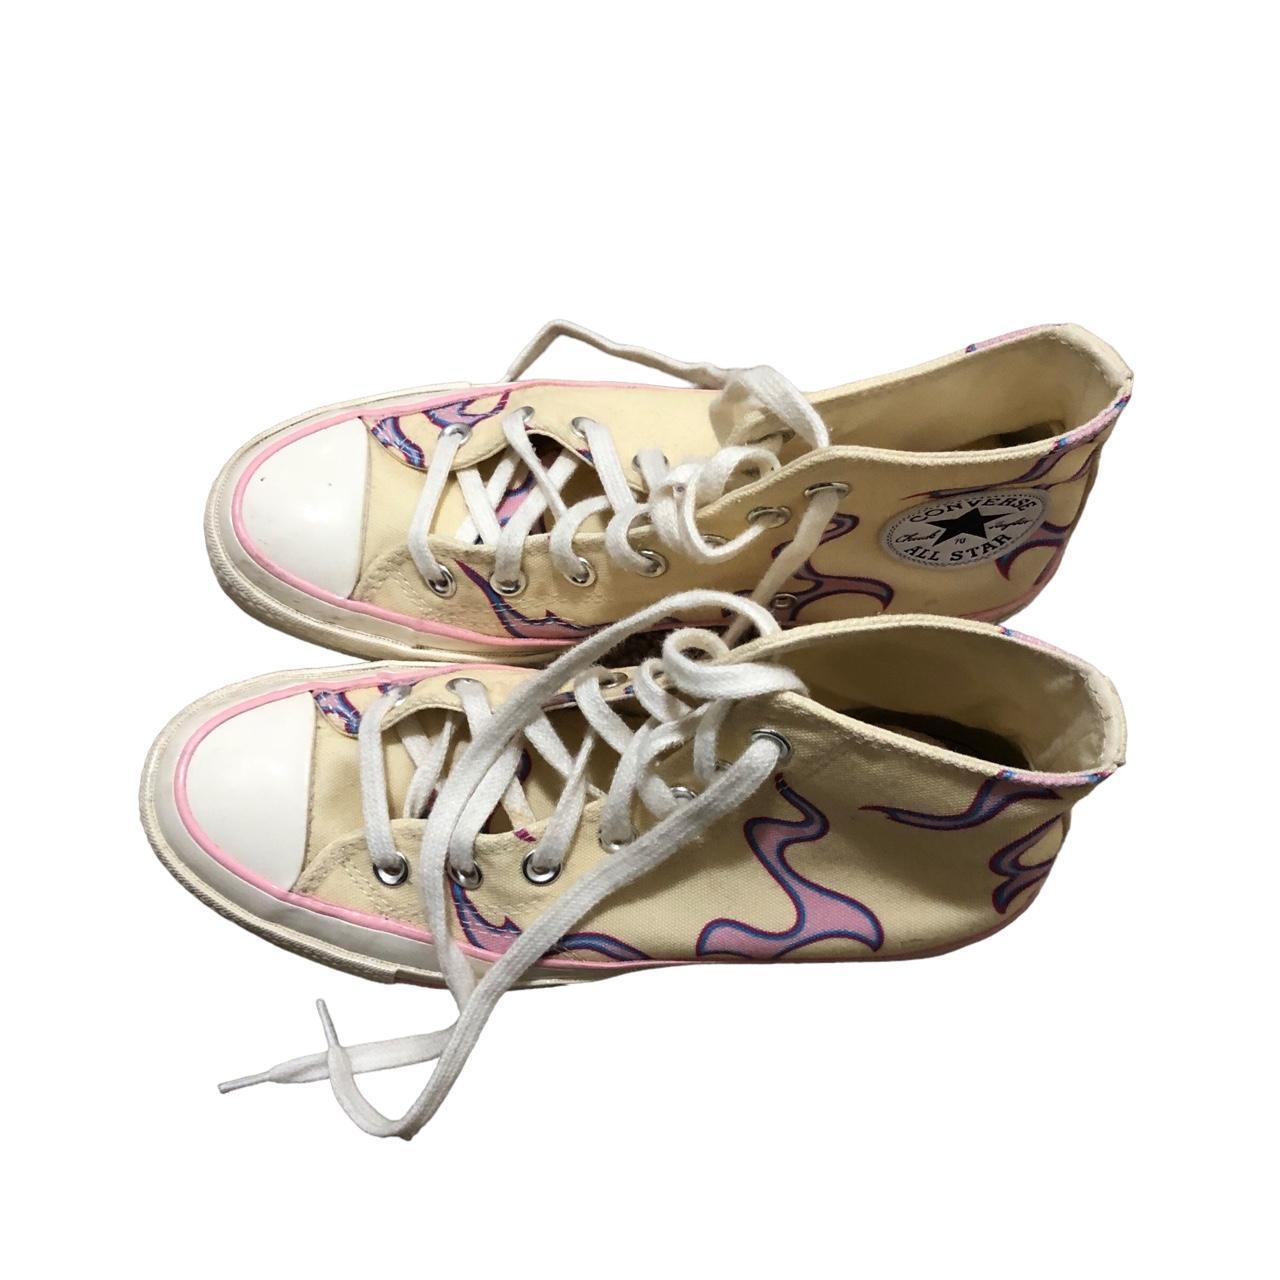 Golf Wang Men's Yellow and Pink Trainers (2)